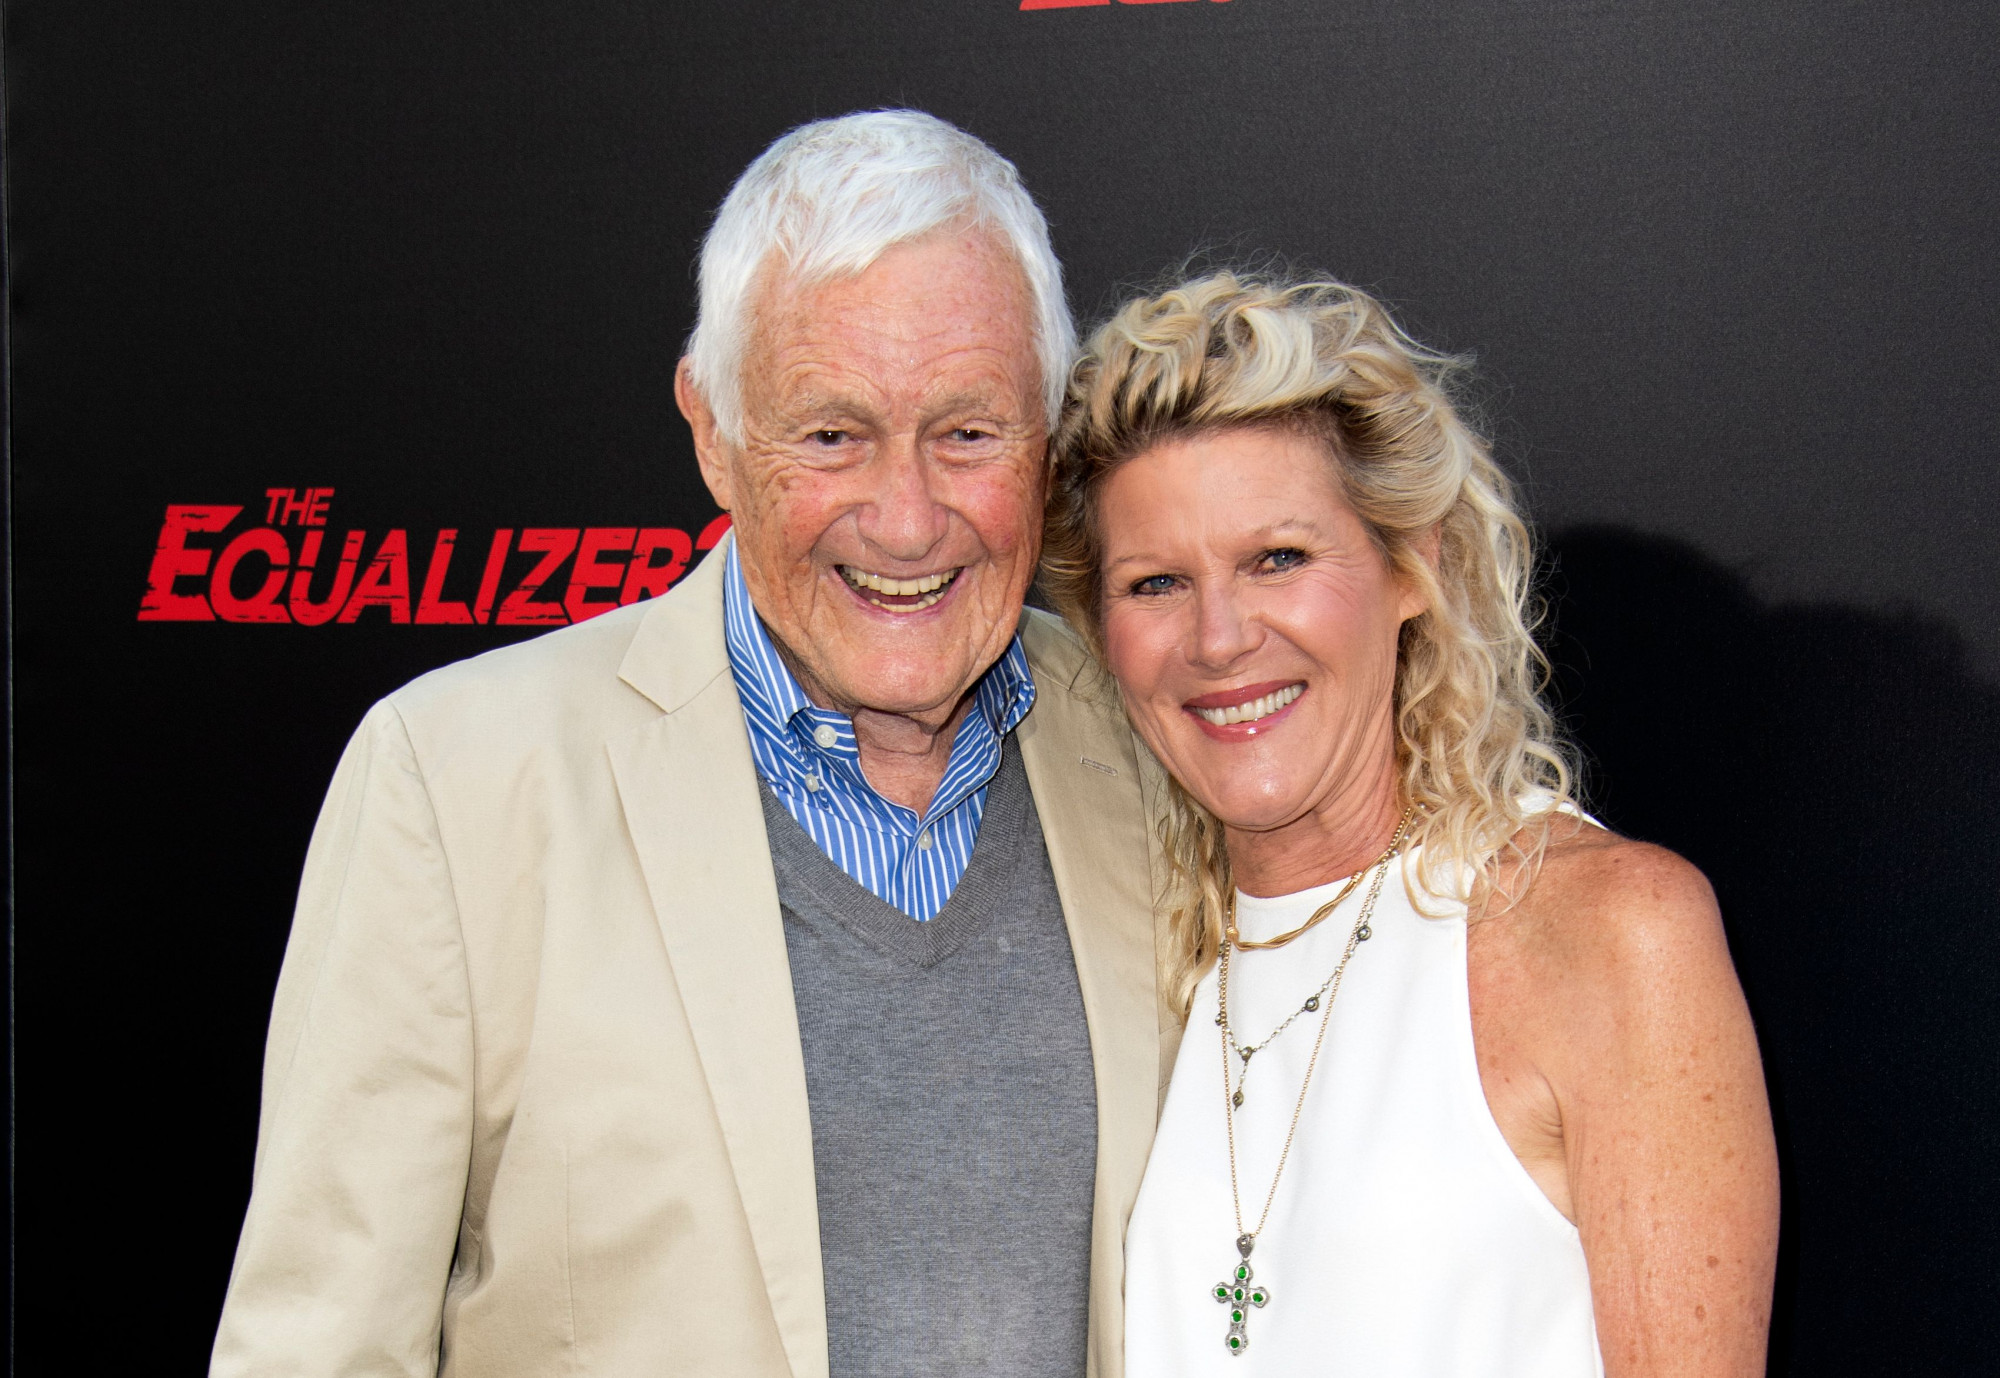 Actor-Comedian Orson Bean, 91, Hit and Killed by Car in LA